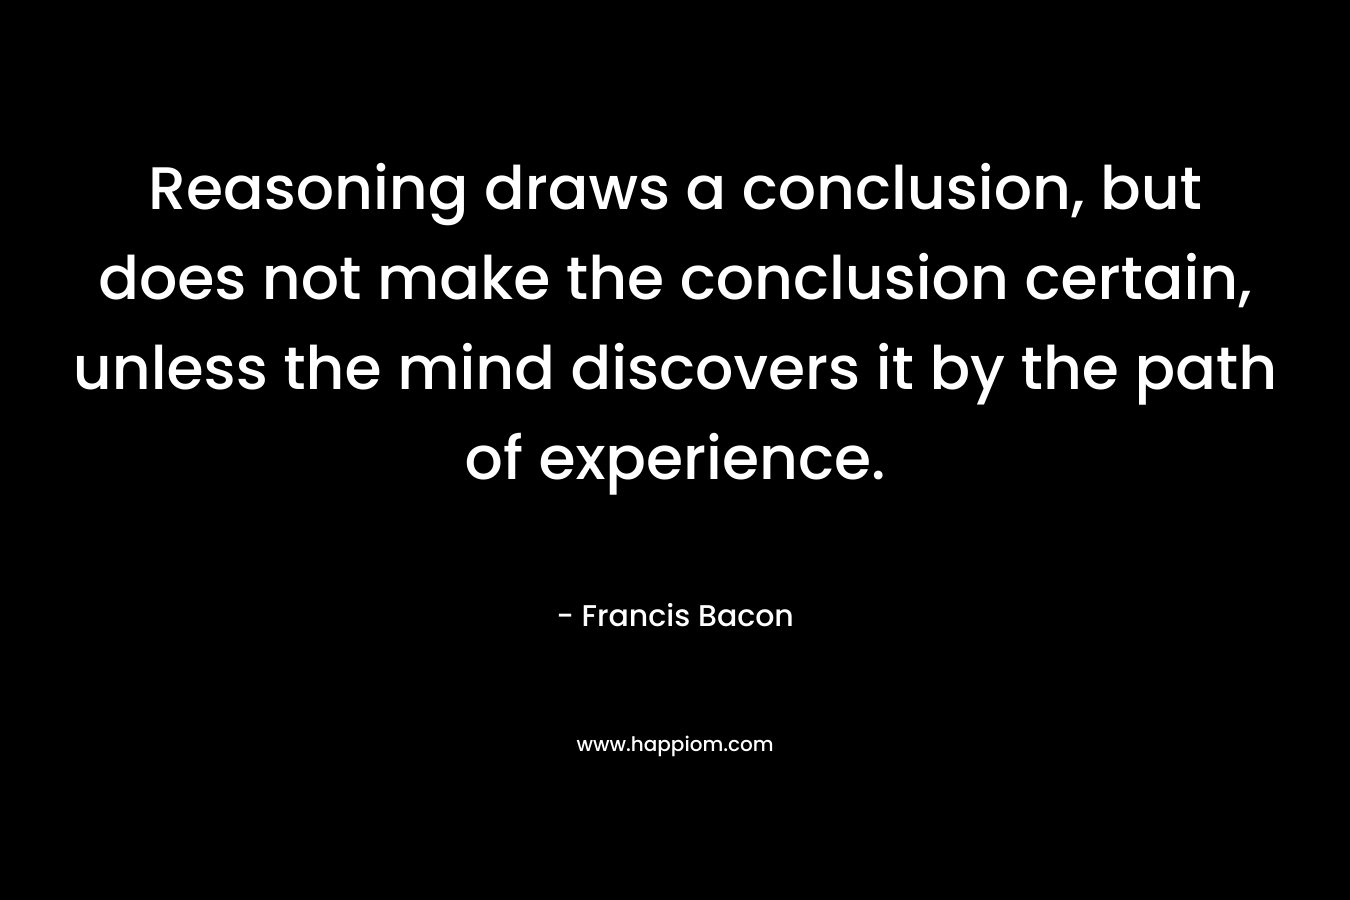 Reasoning draws a conclusion, but does not make the conclusion certain, unless the mind discovers it by the path of experience.